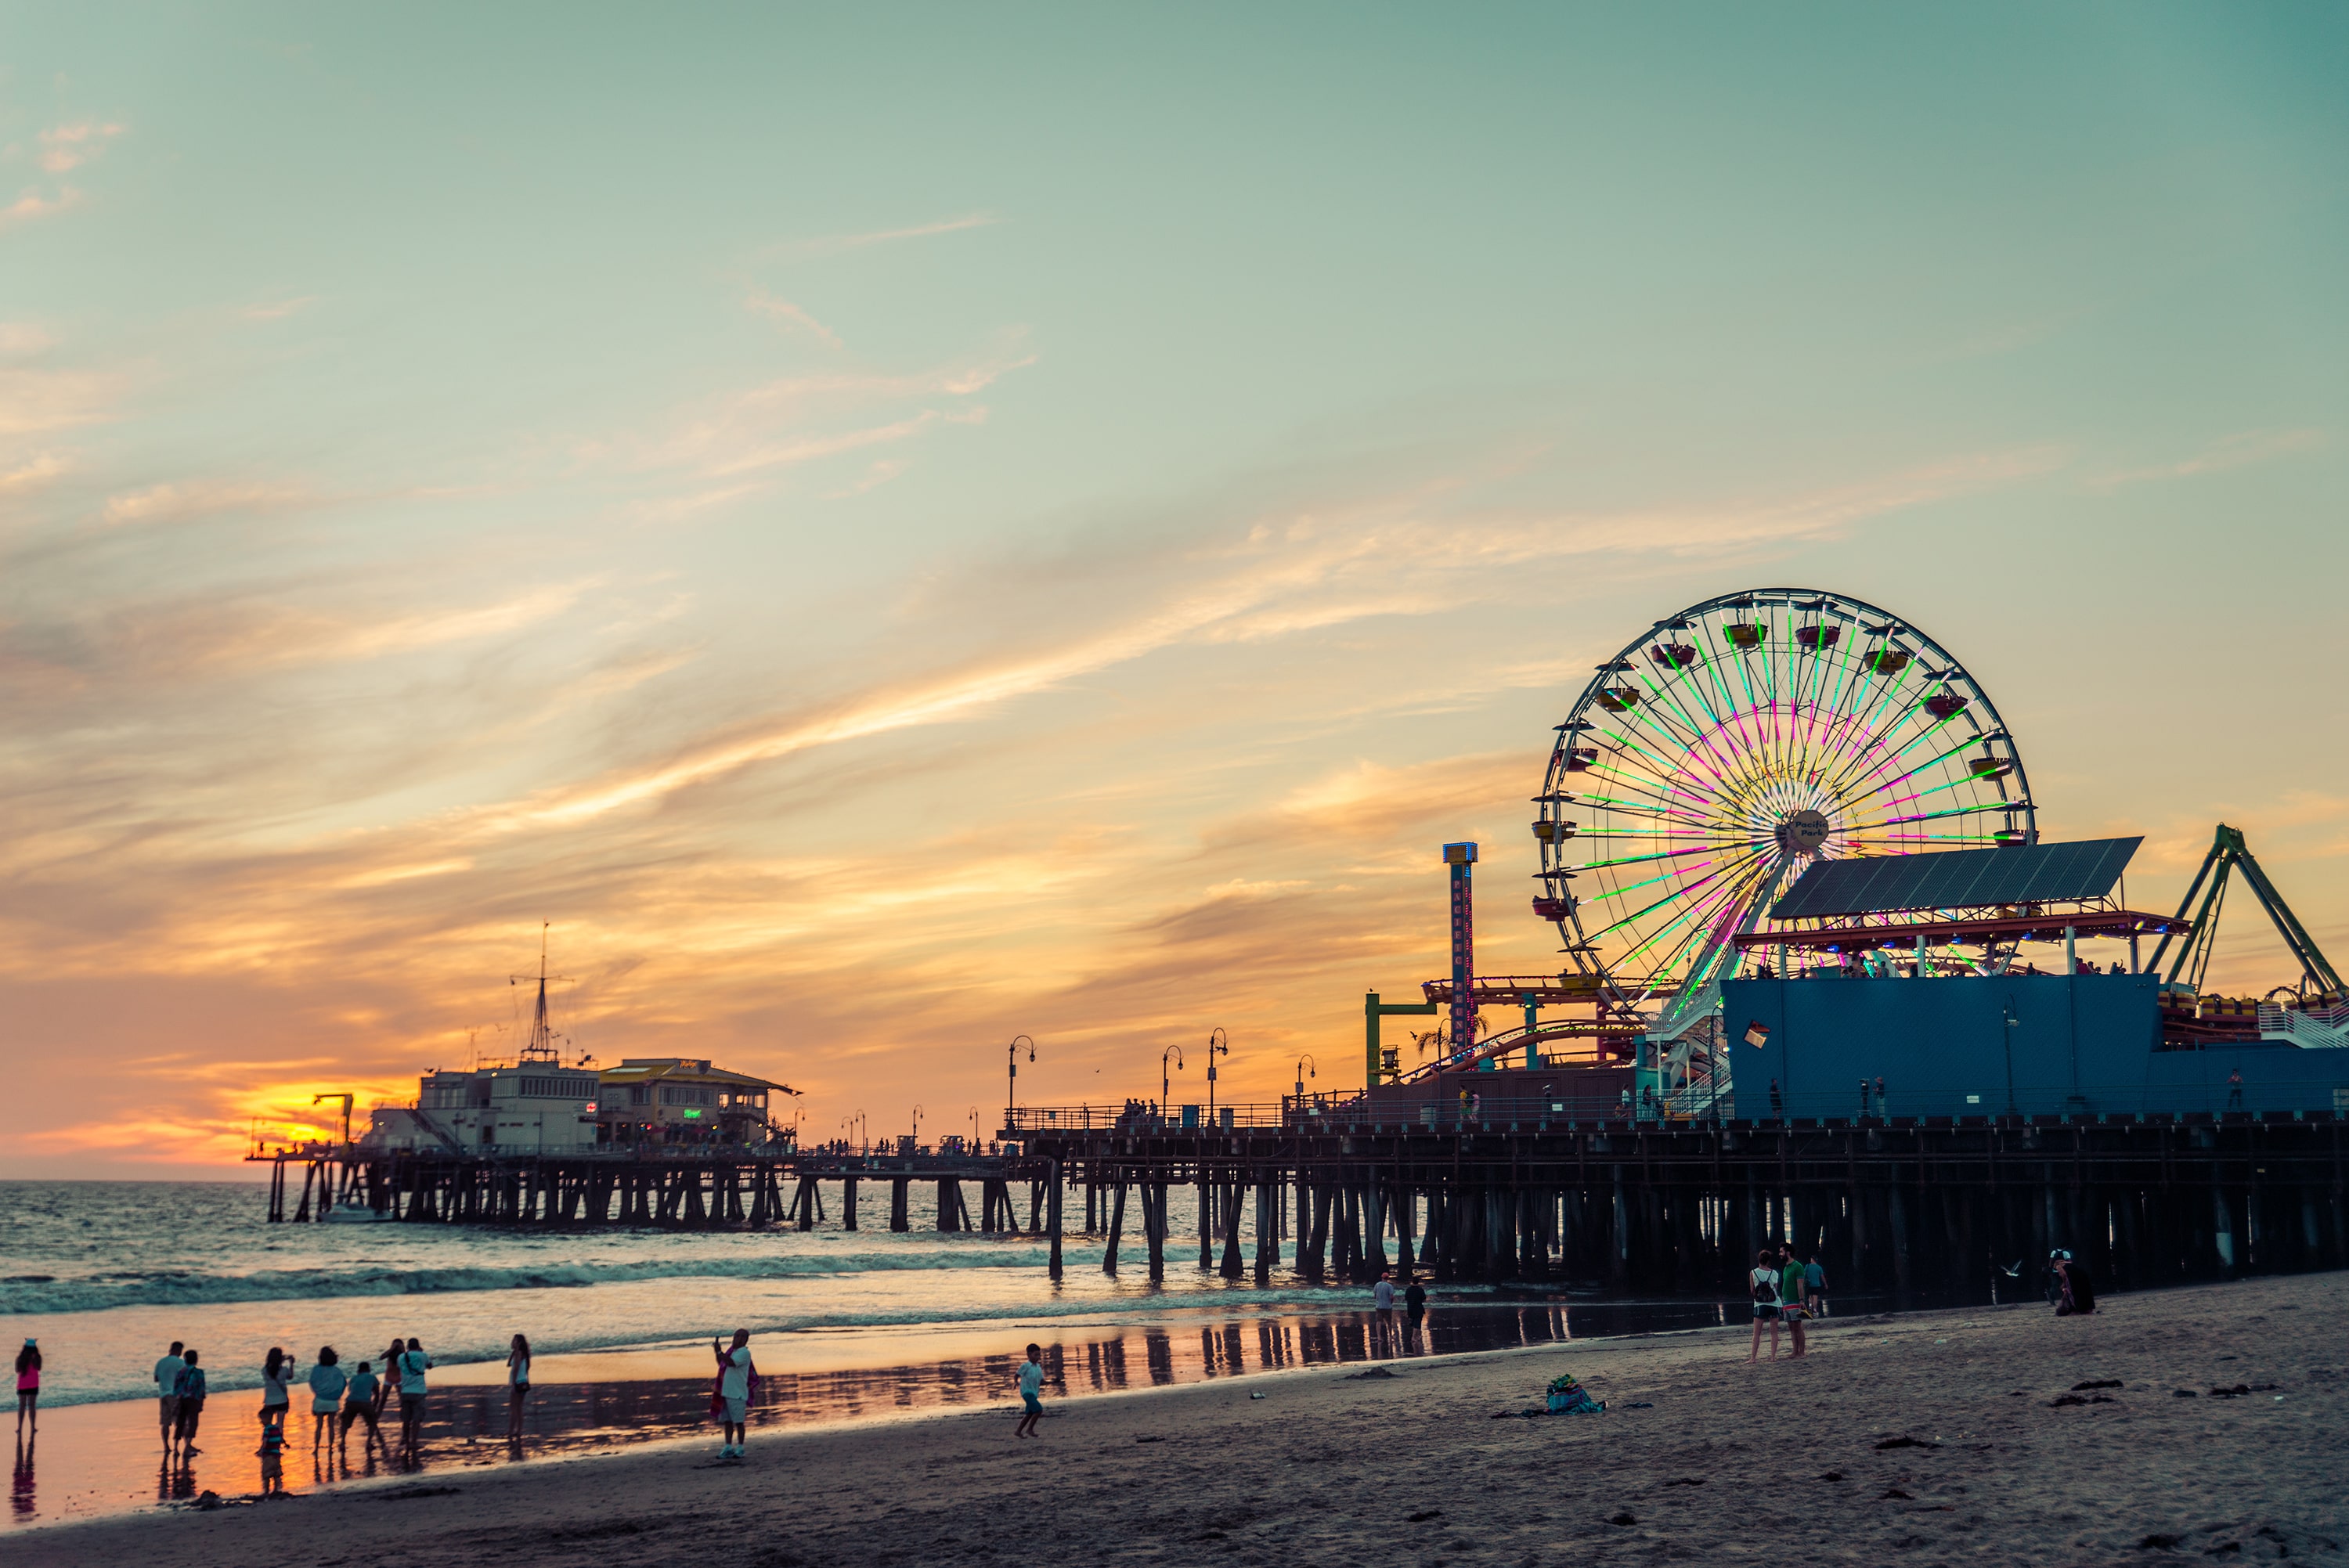 Santa Monica Pier at sunset. You can see the Ferris wheel and part of the beach.